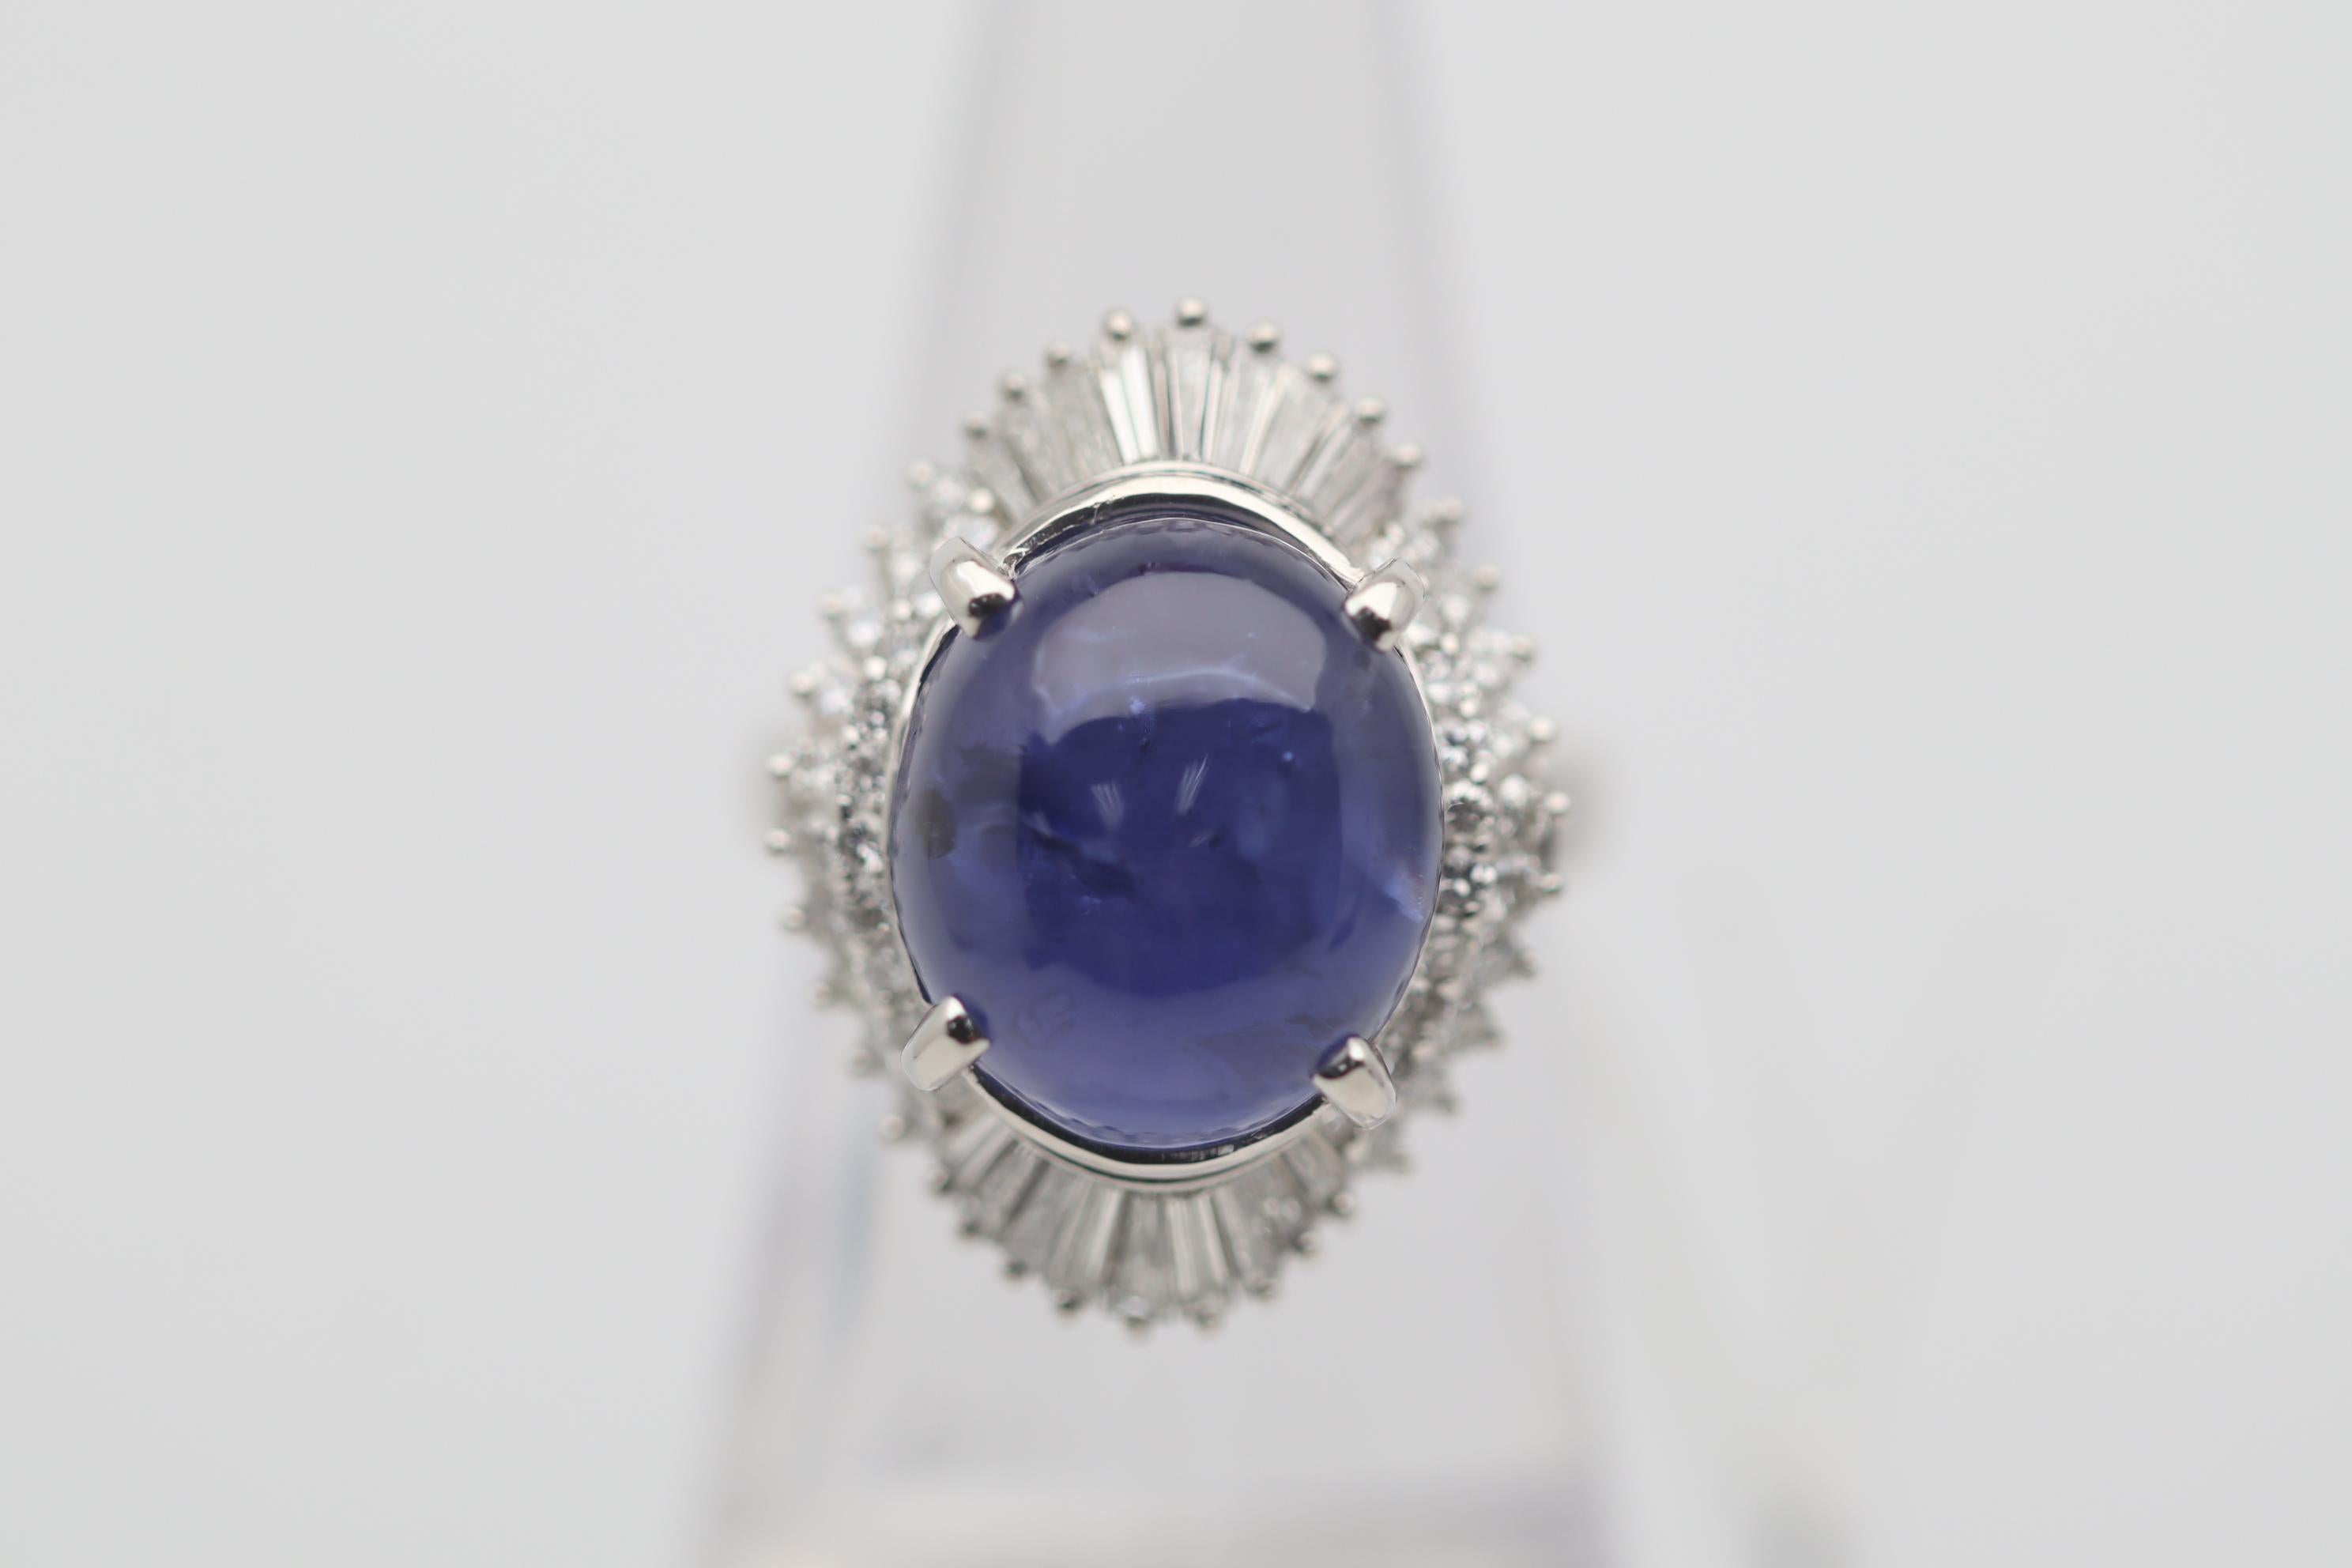 A fine and rare sapphire exhibiting two phenomena, color-change and asterism (star-effect)! The 10.50 carat sapphire has a classic even blue color in white light and changes to a rich purple color under candle light or yellow light. Adding to that,